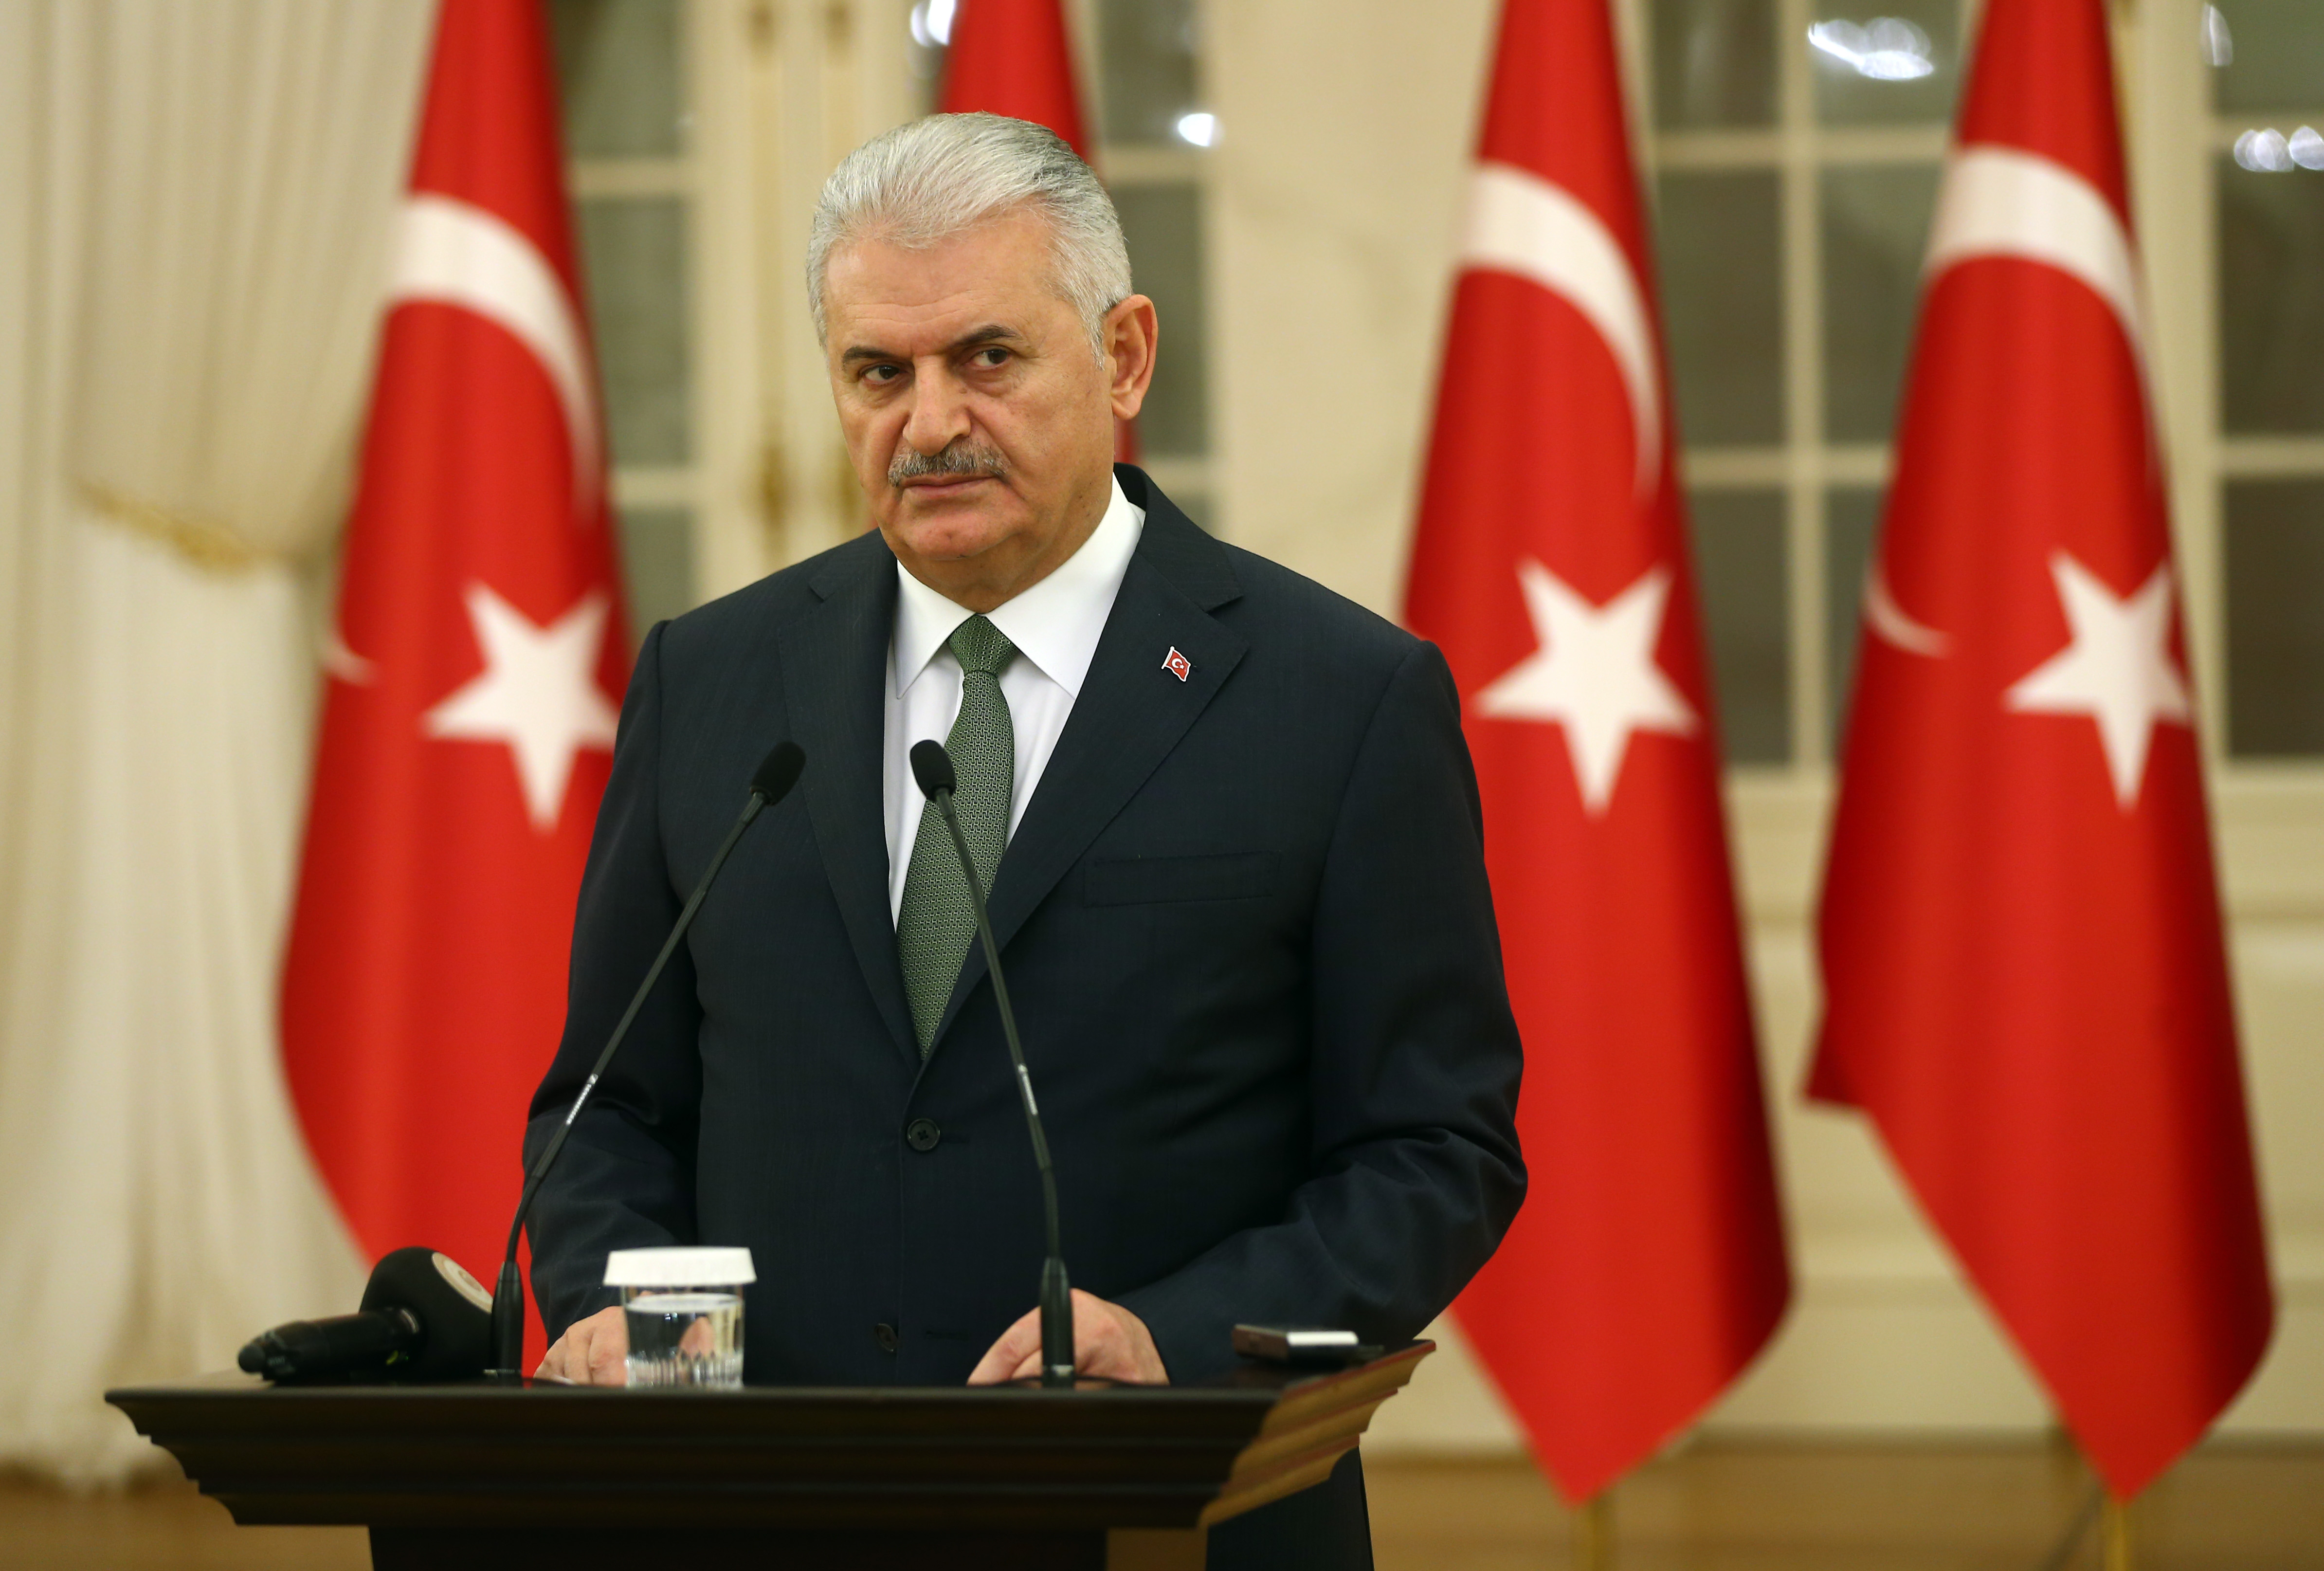 Turkey ‘warns’ over any repetition of attack in Syria